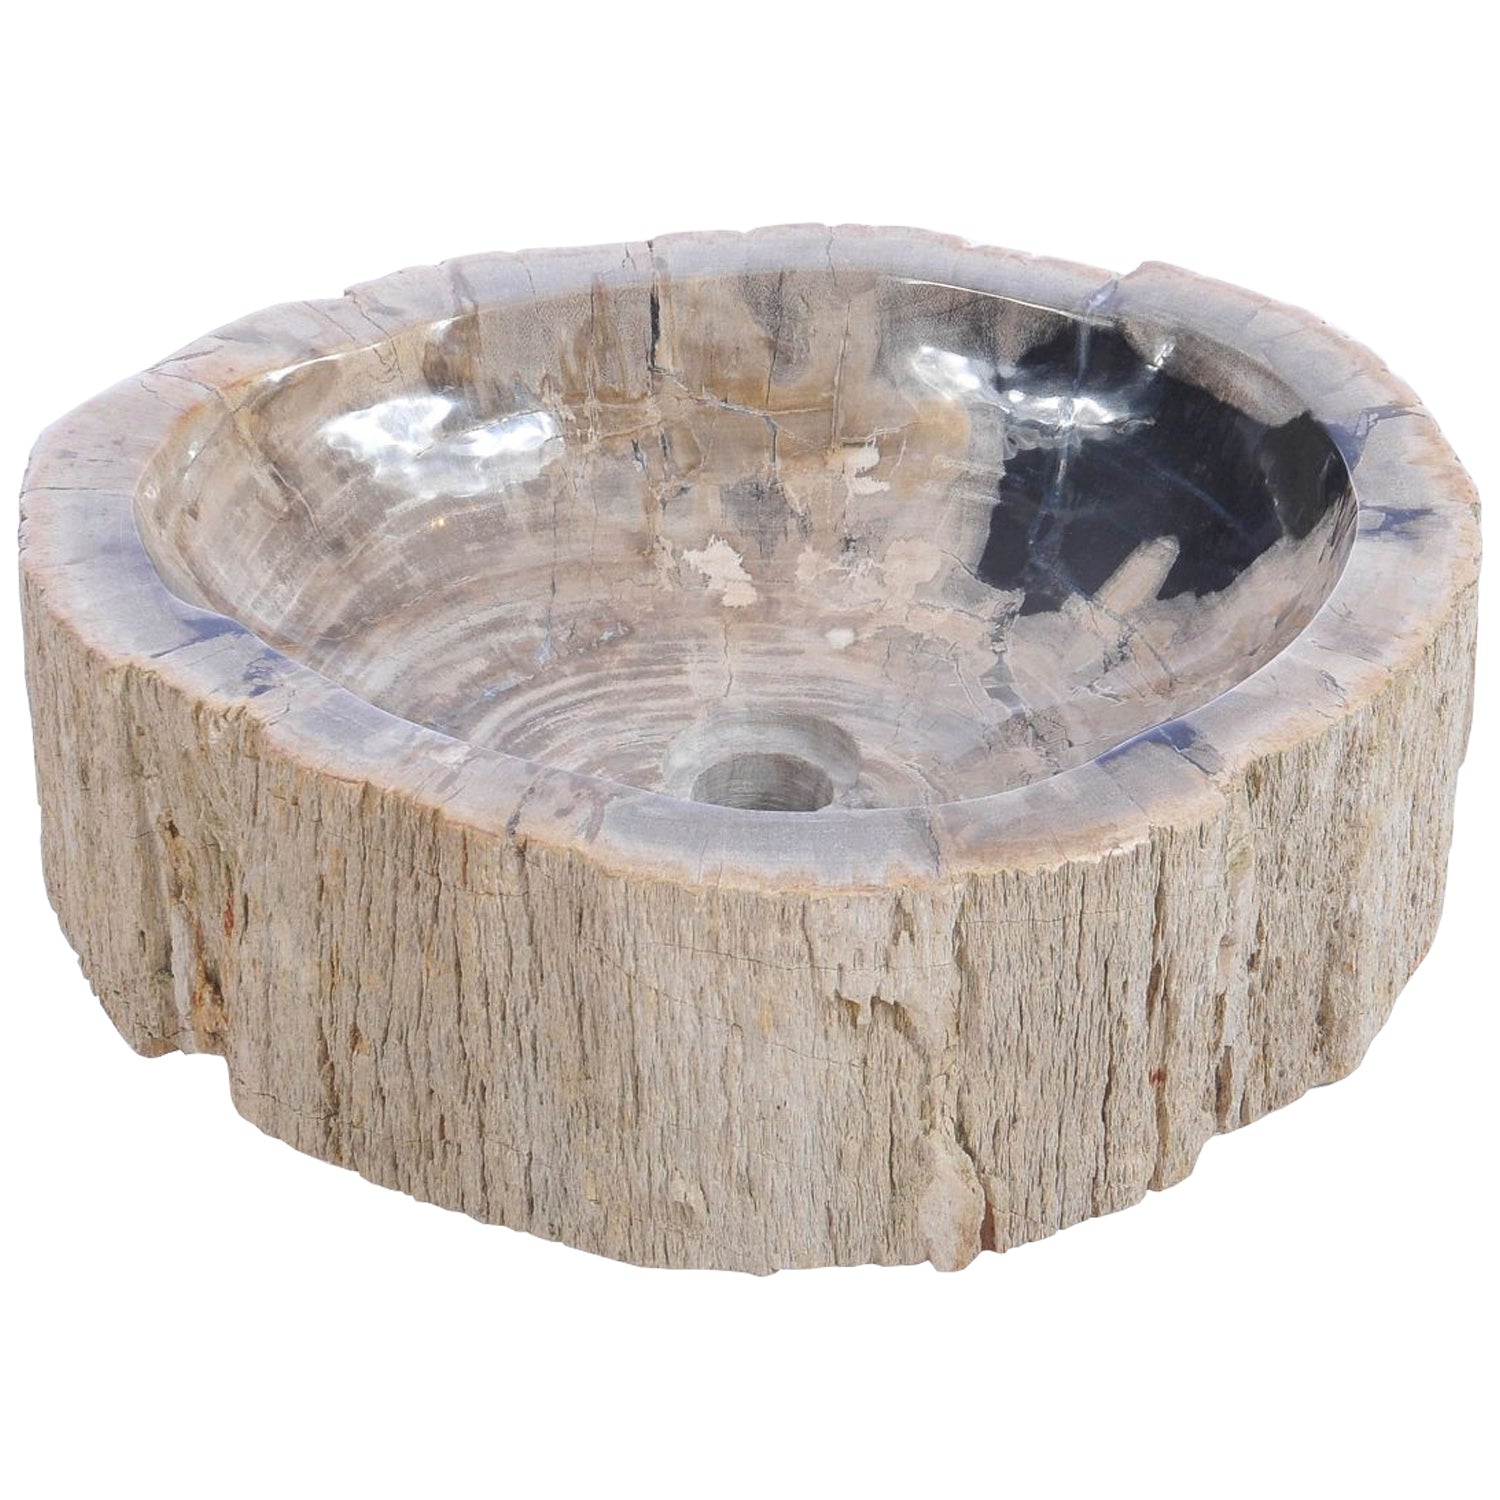 LOW CONIC WOOD SINK